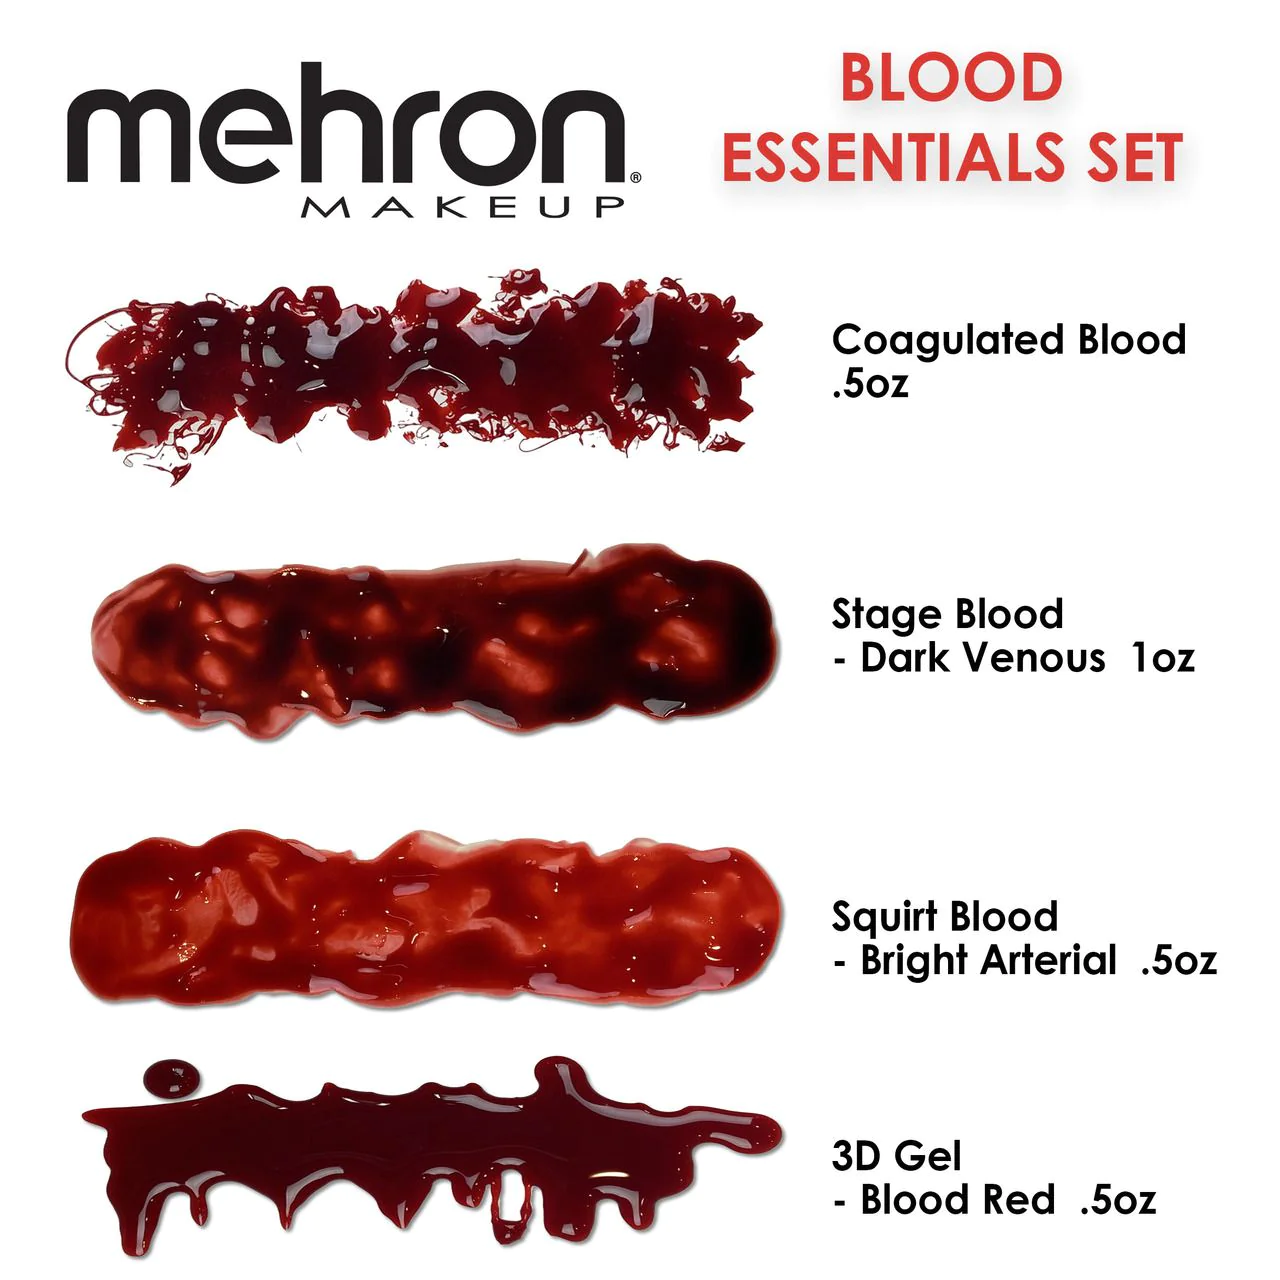 Mehron Stage Blood - Bright Arterial w/6 capsules (15 ml)